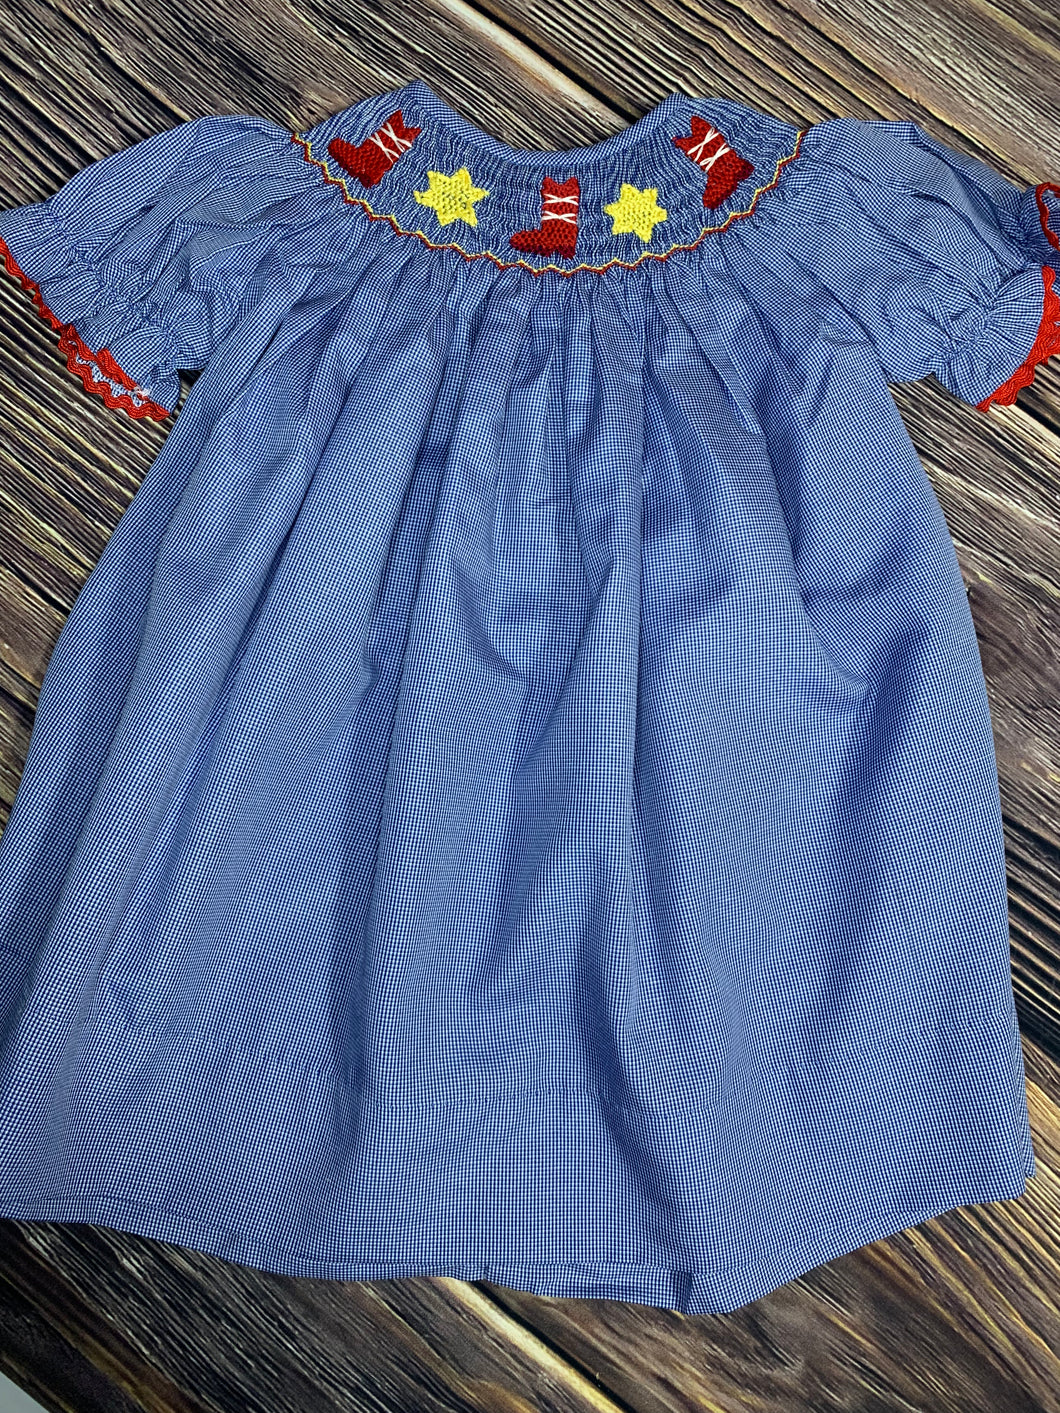 Rodeo Hand Smocked Dress, Stars and Cowboy Boots